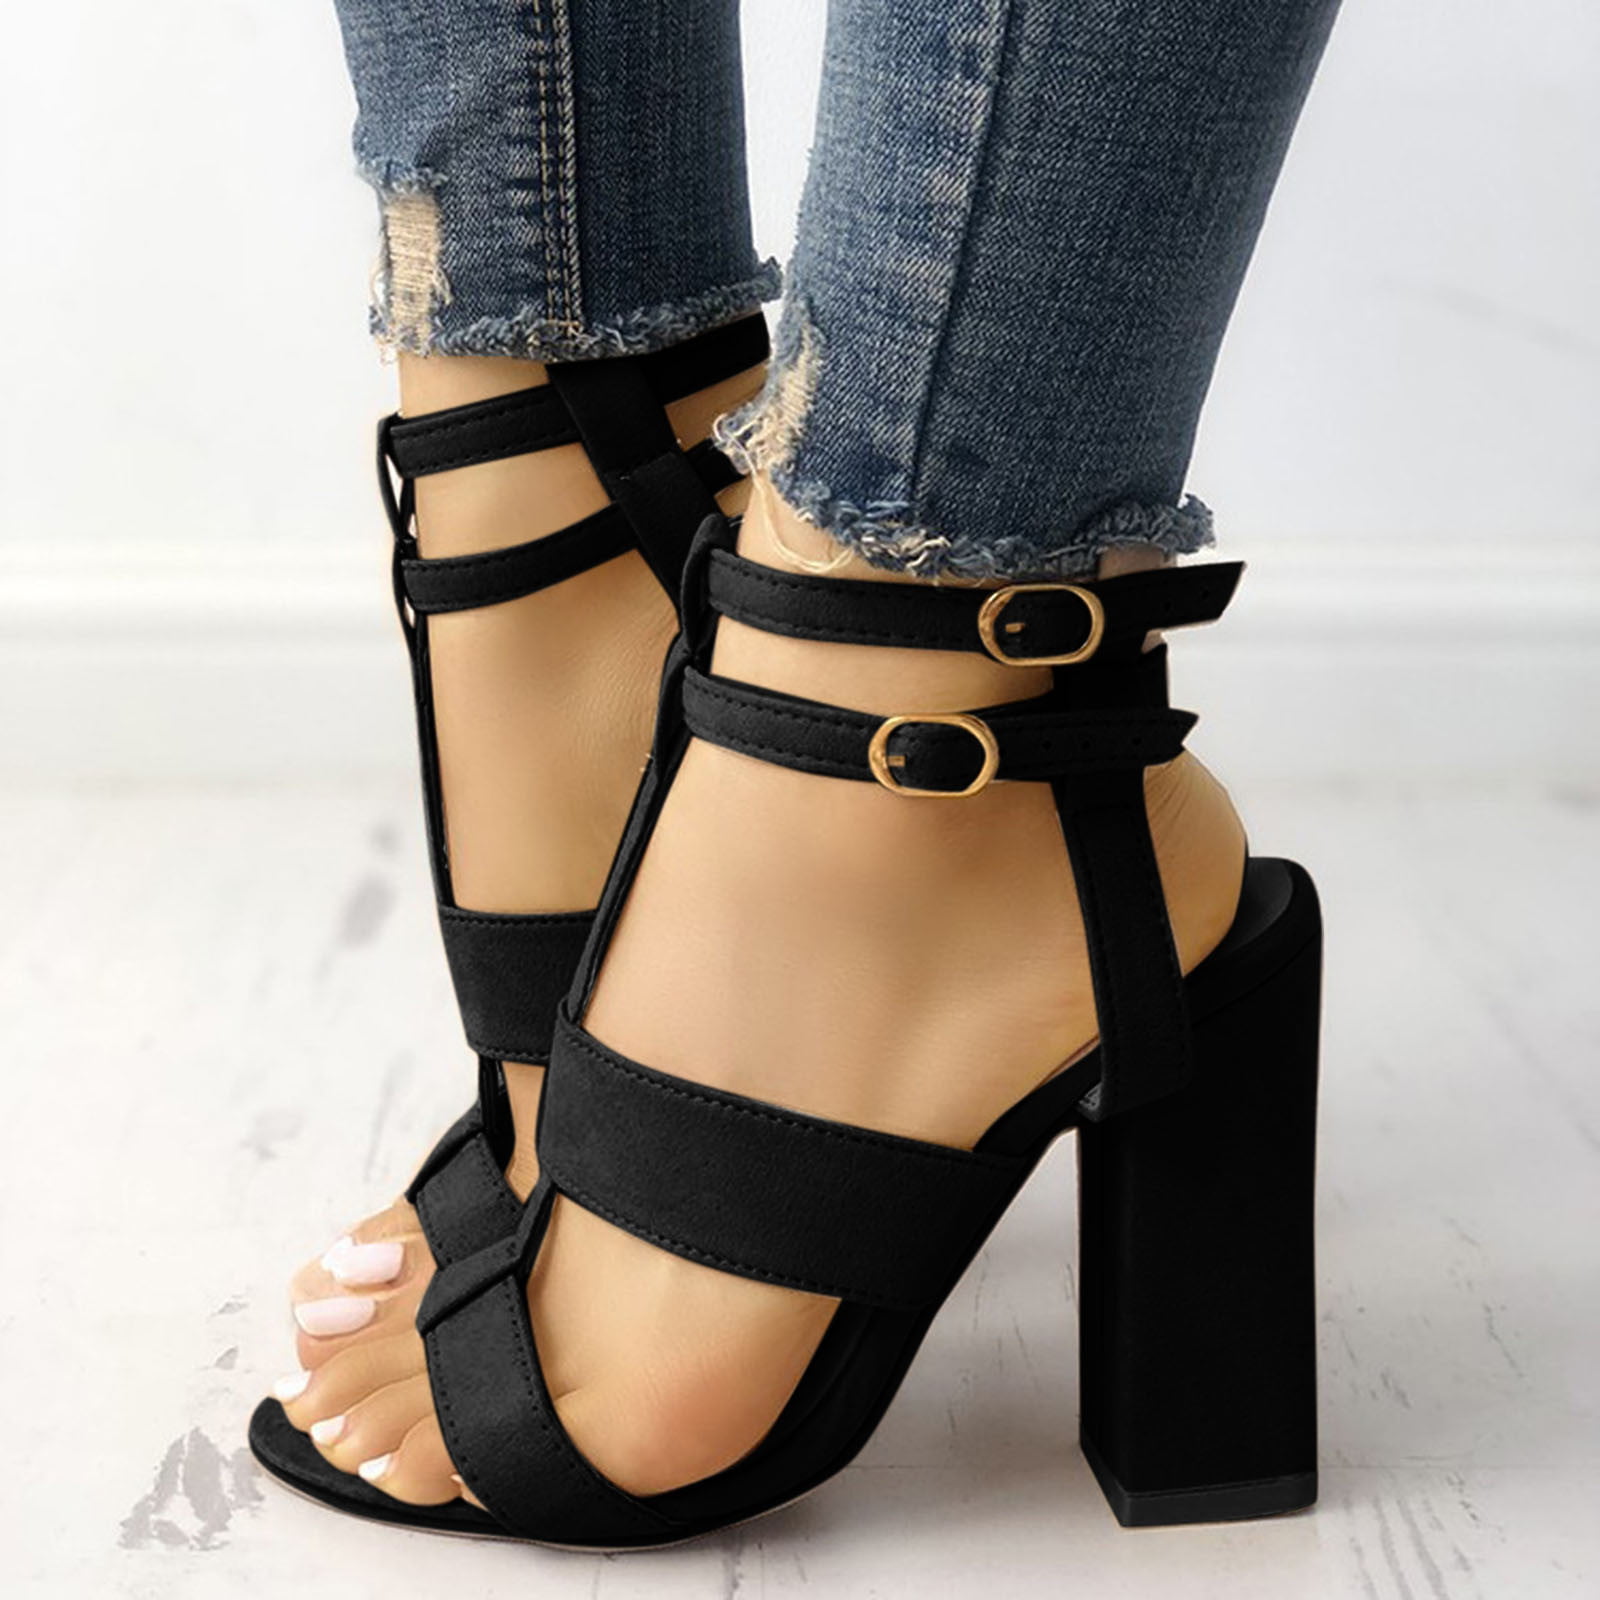 Square High Heel Sandals Thick Sandals Suede Fish Mouth Women Shoes Size Plus 